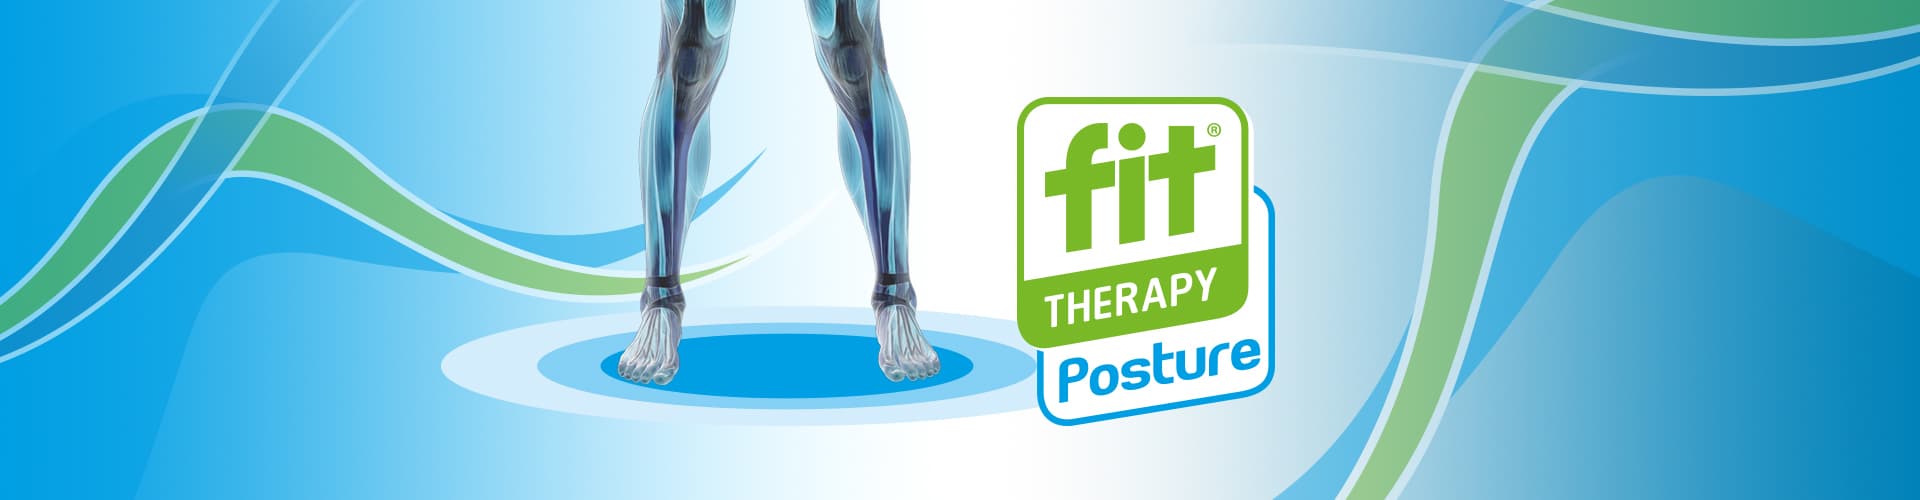 FIT Therapy Posture